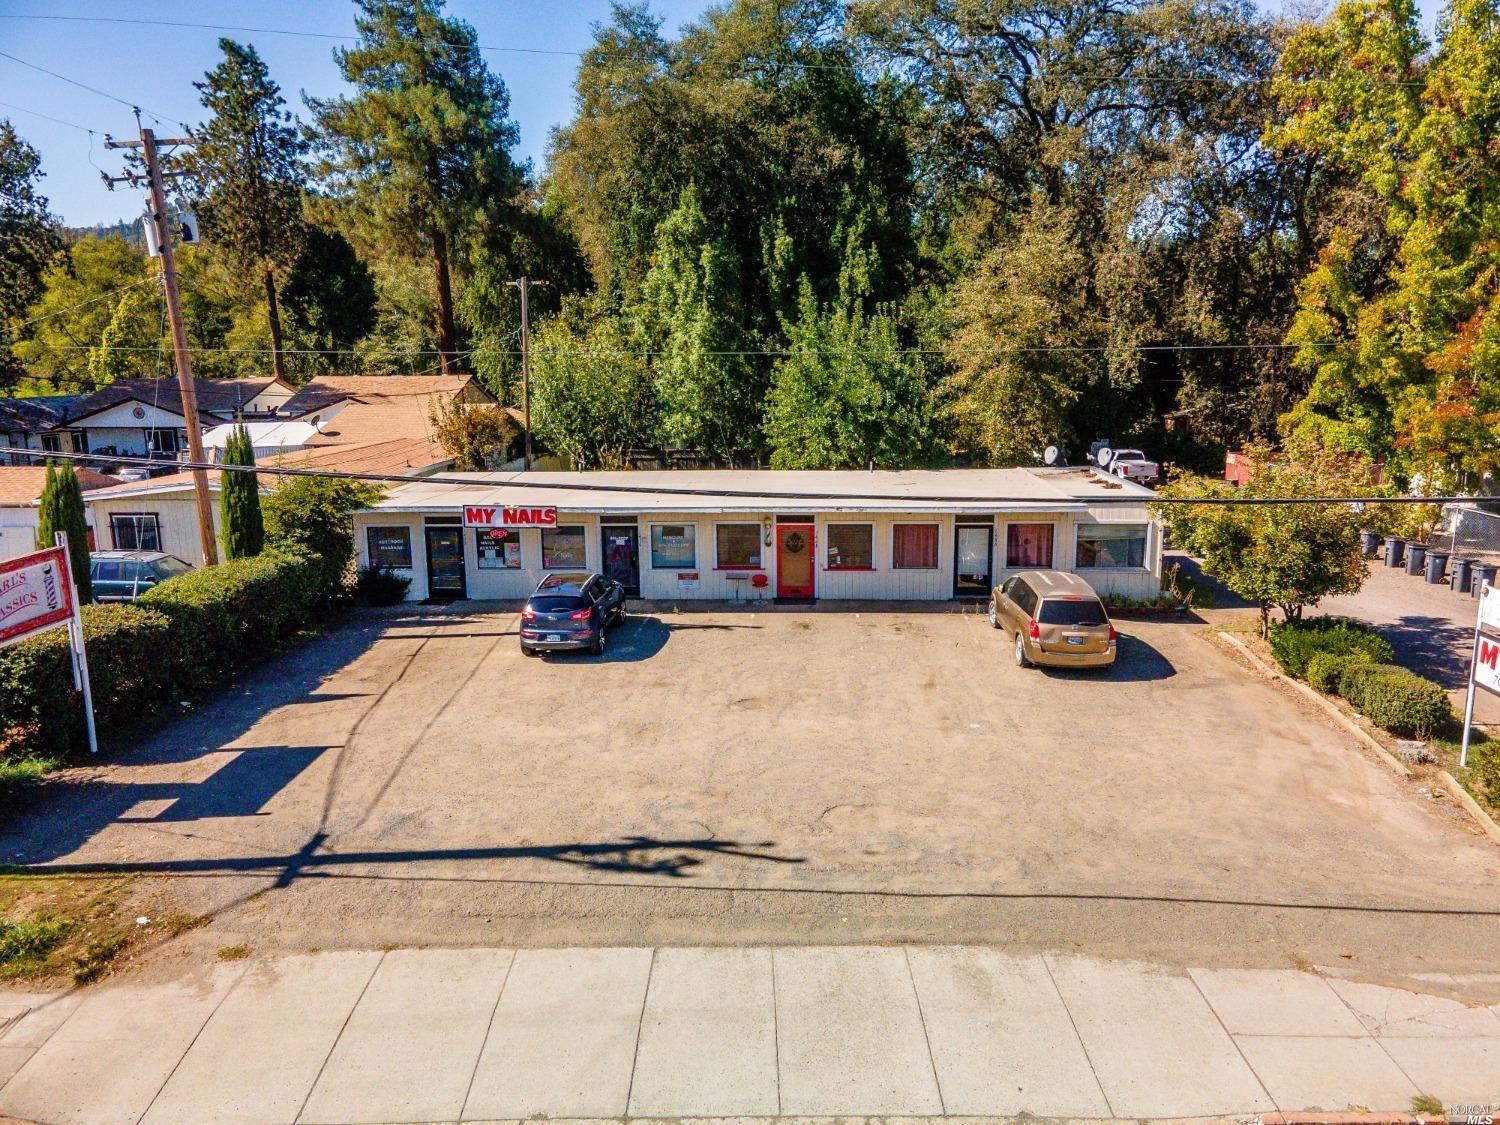 Photo of 1476 Main St in Willits, CA